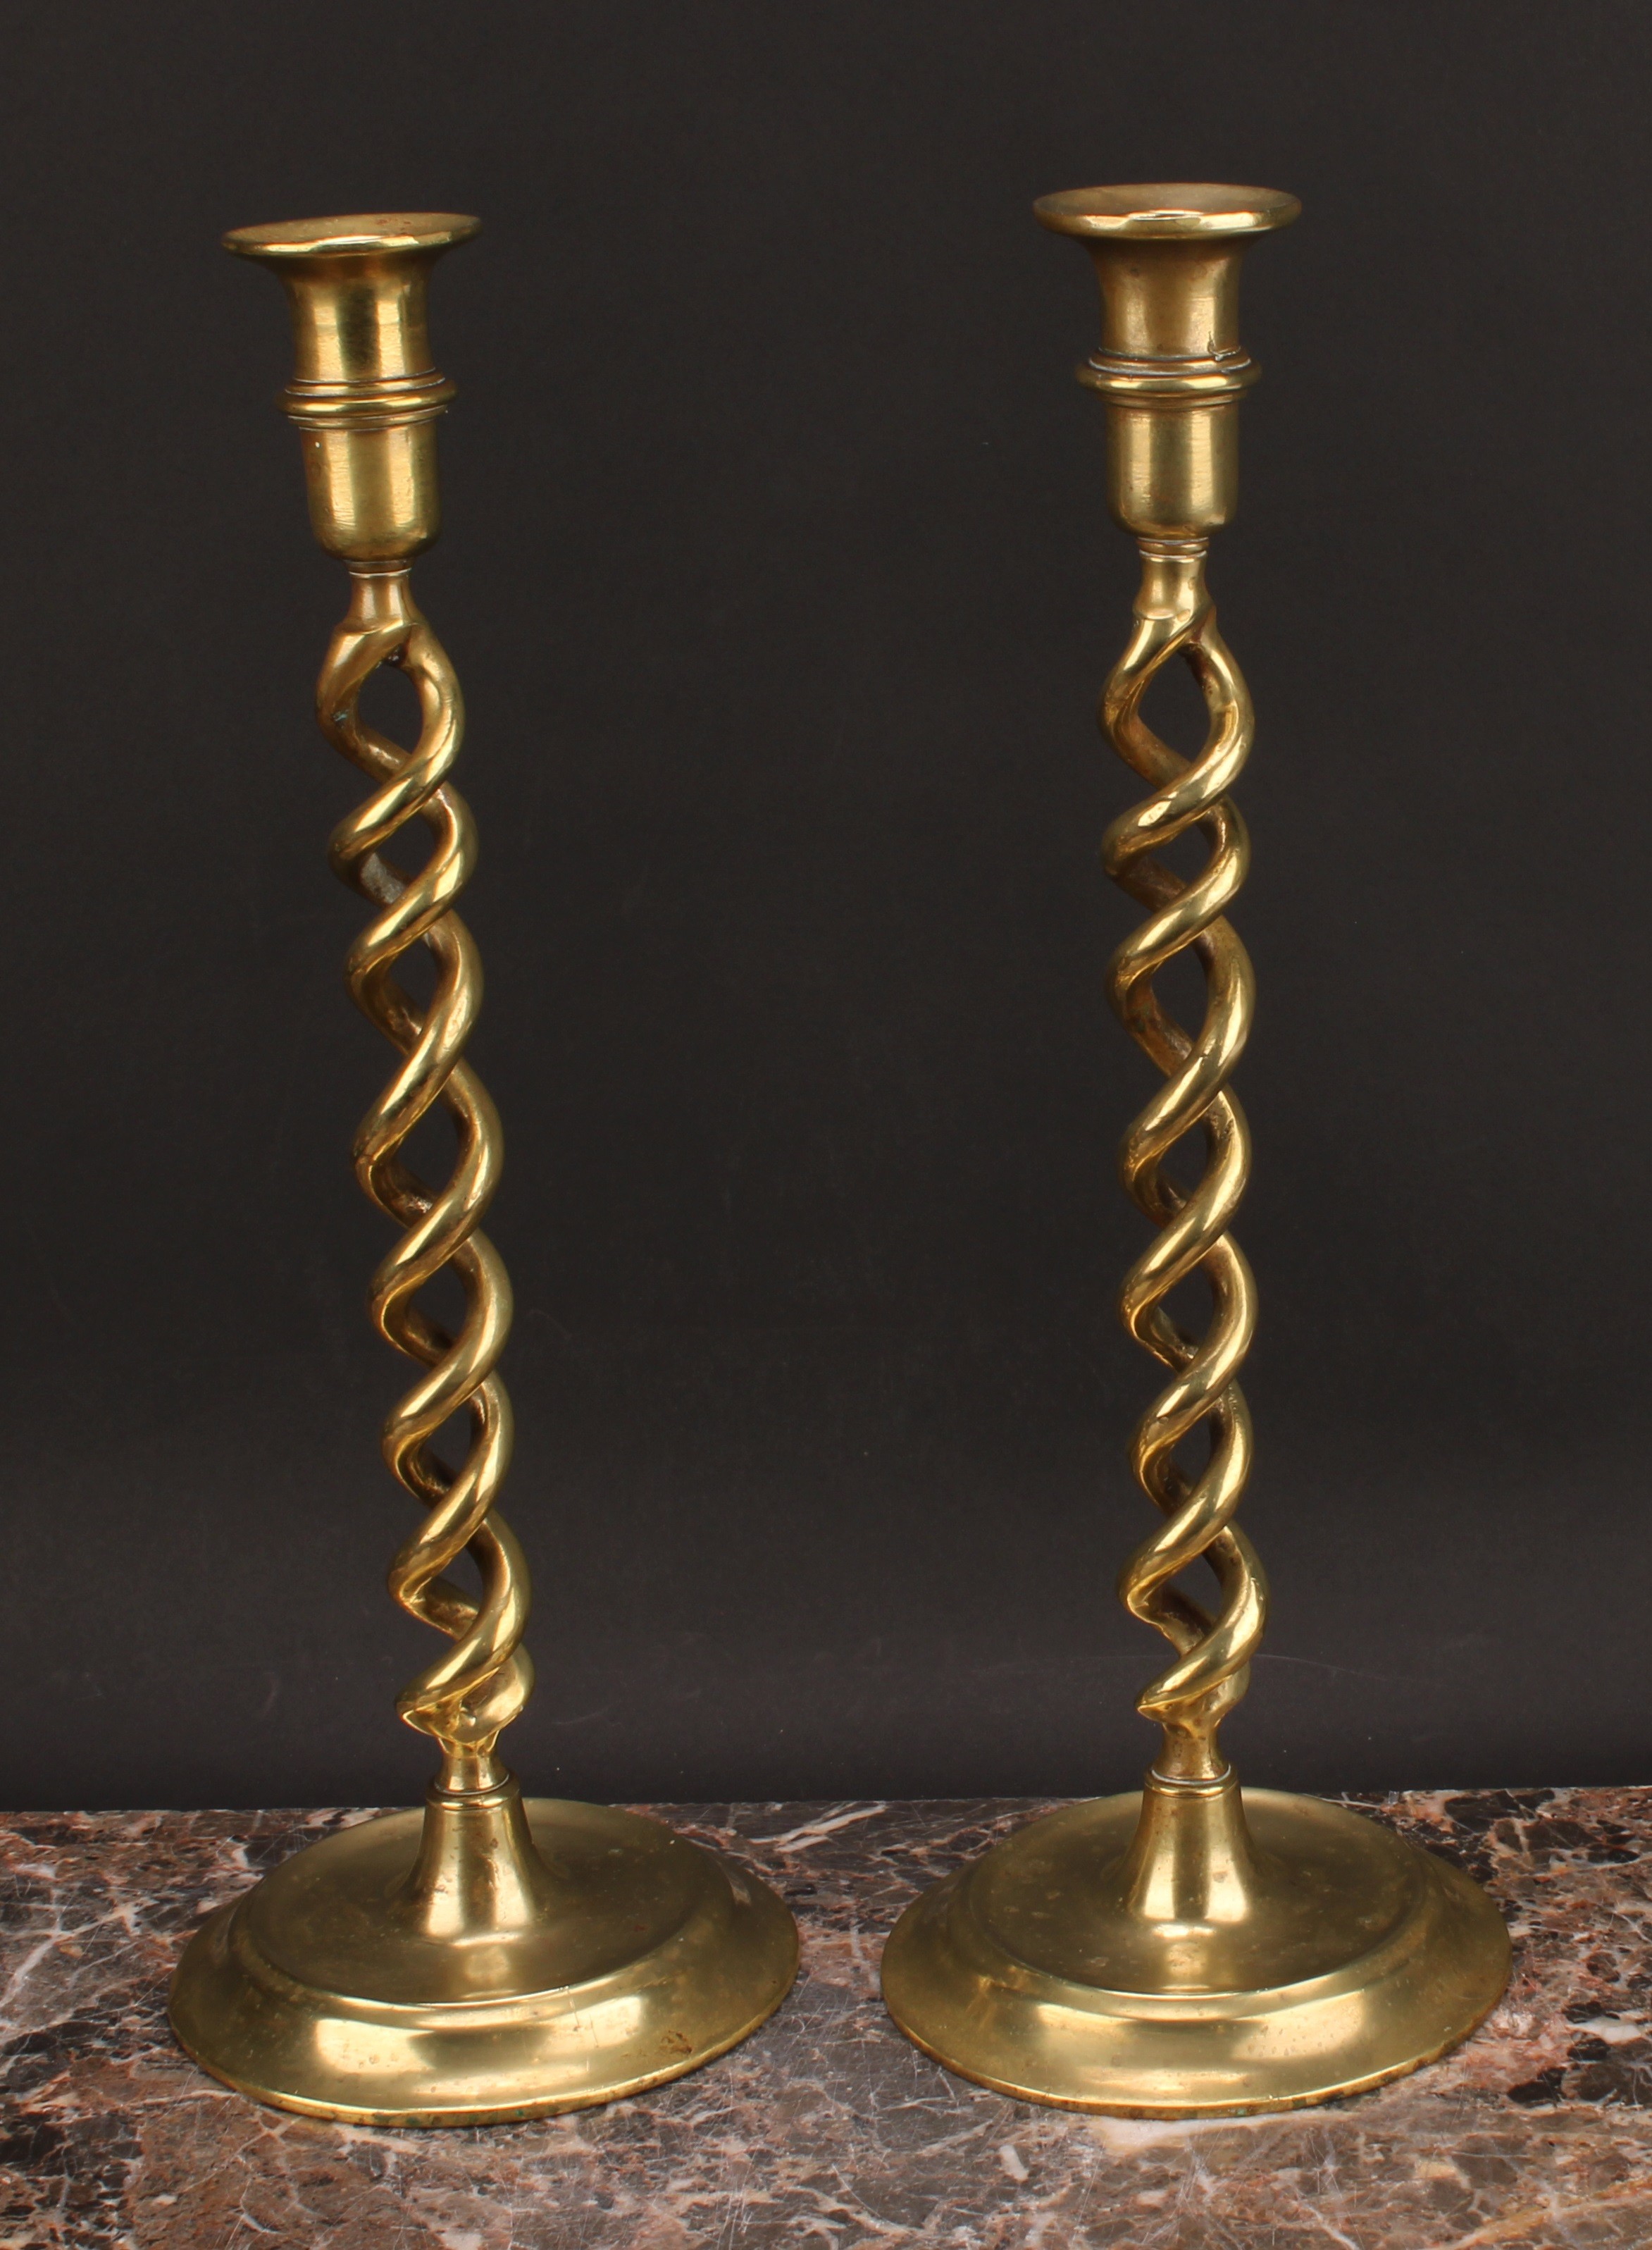 A pair of Victorian brass open-twist table candlesticks, dished circular bases, 37cm high, c.1880 - Image 2 of 4